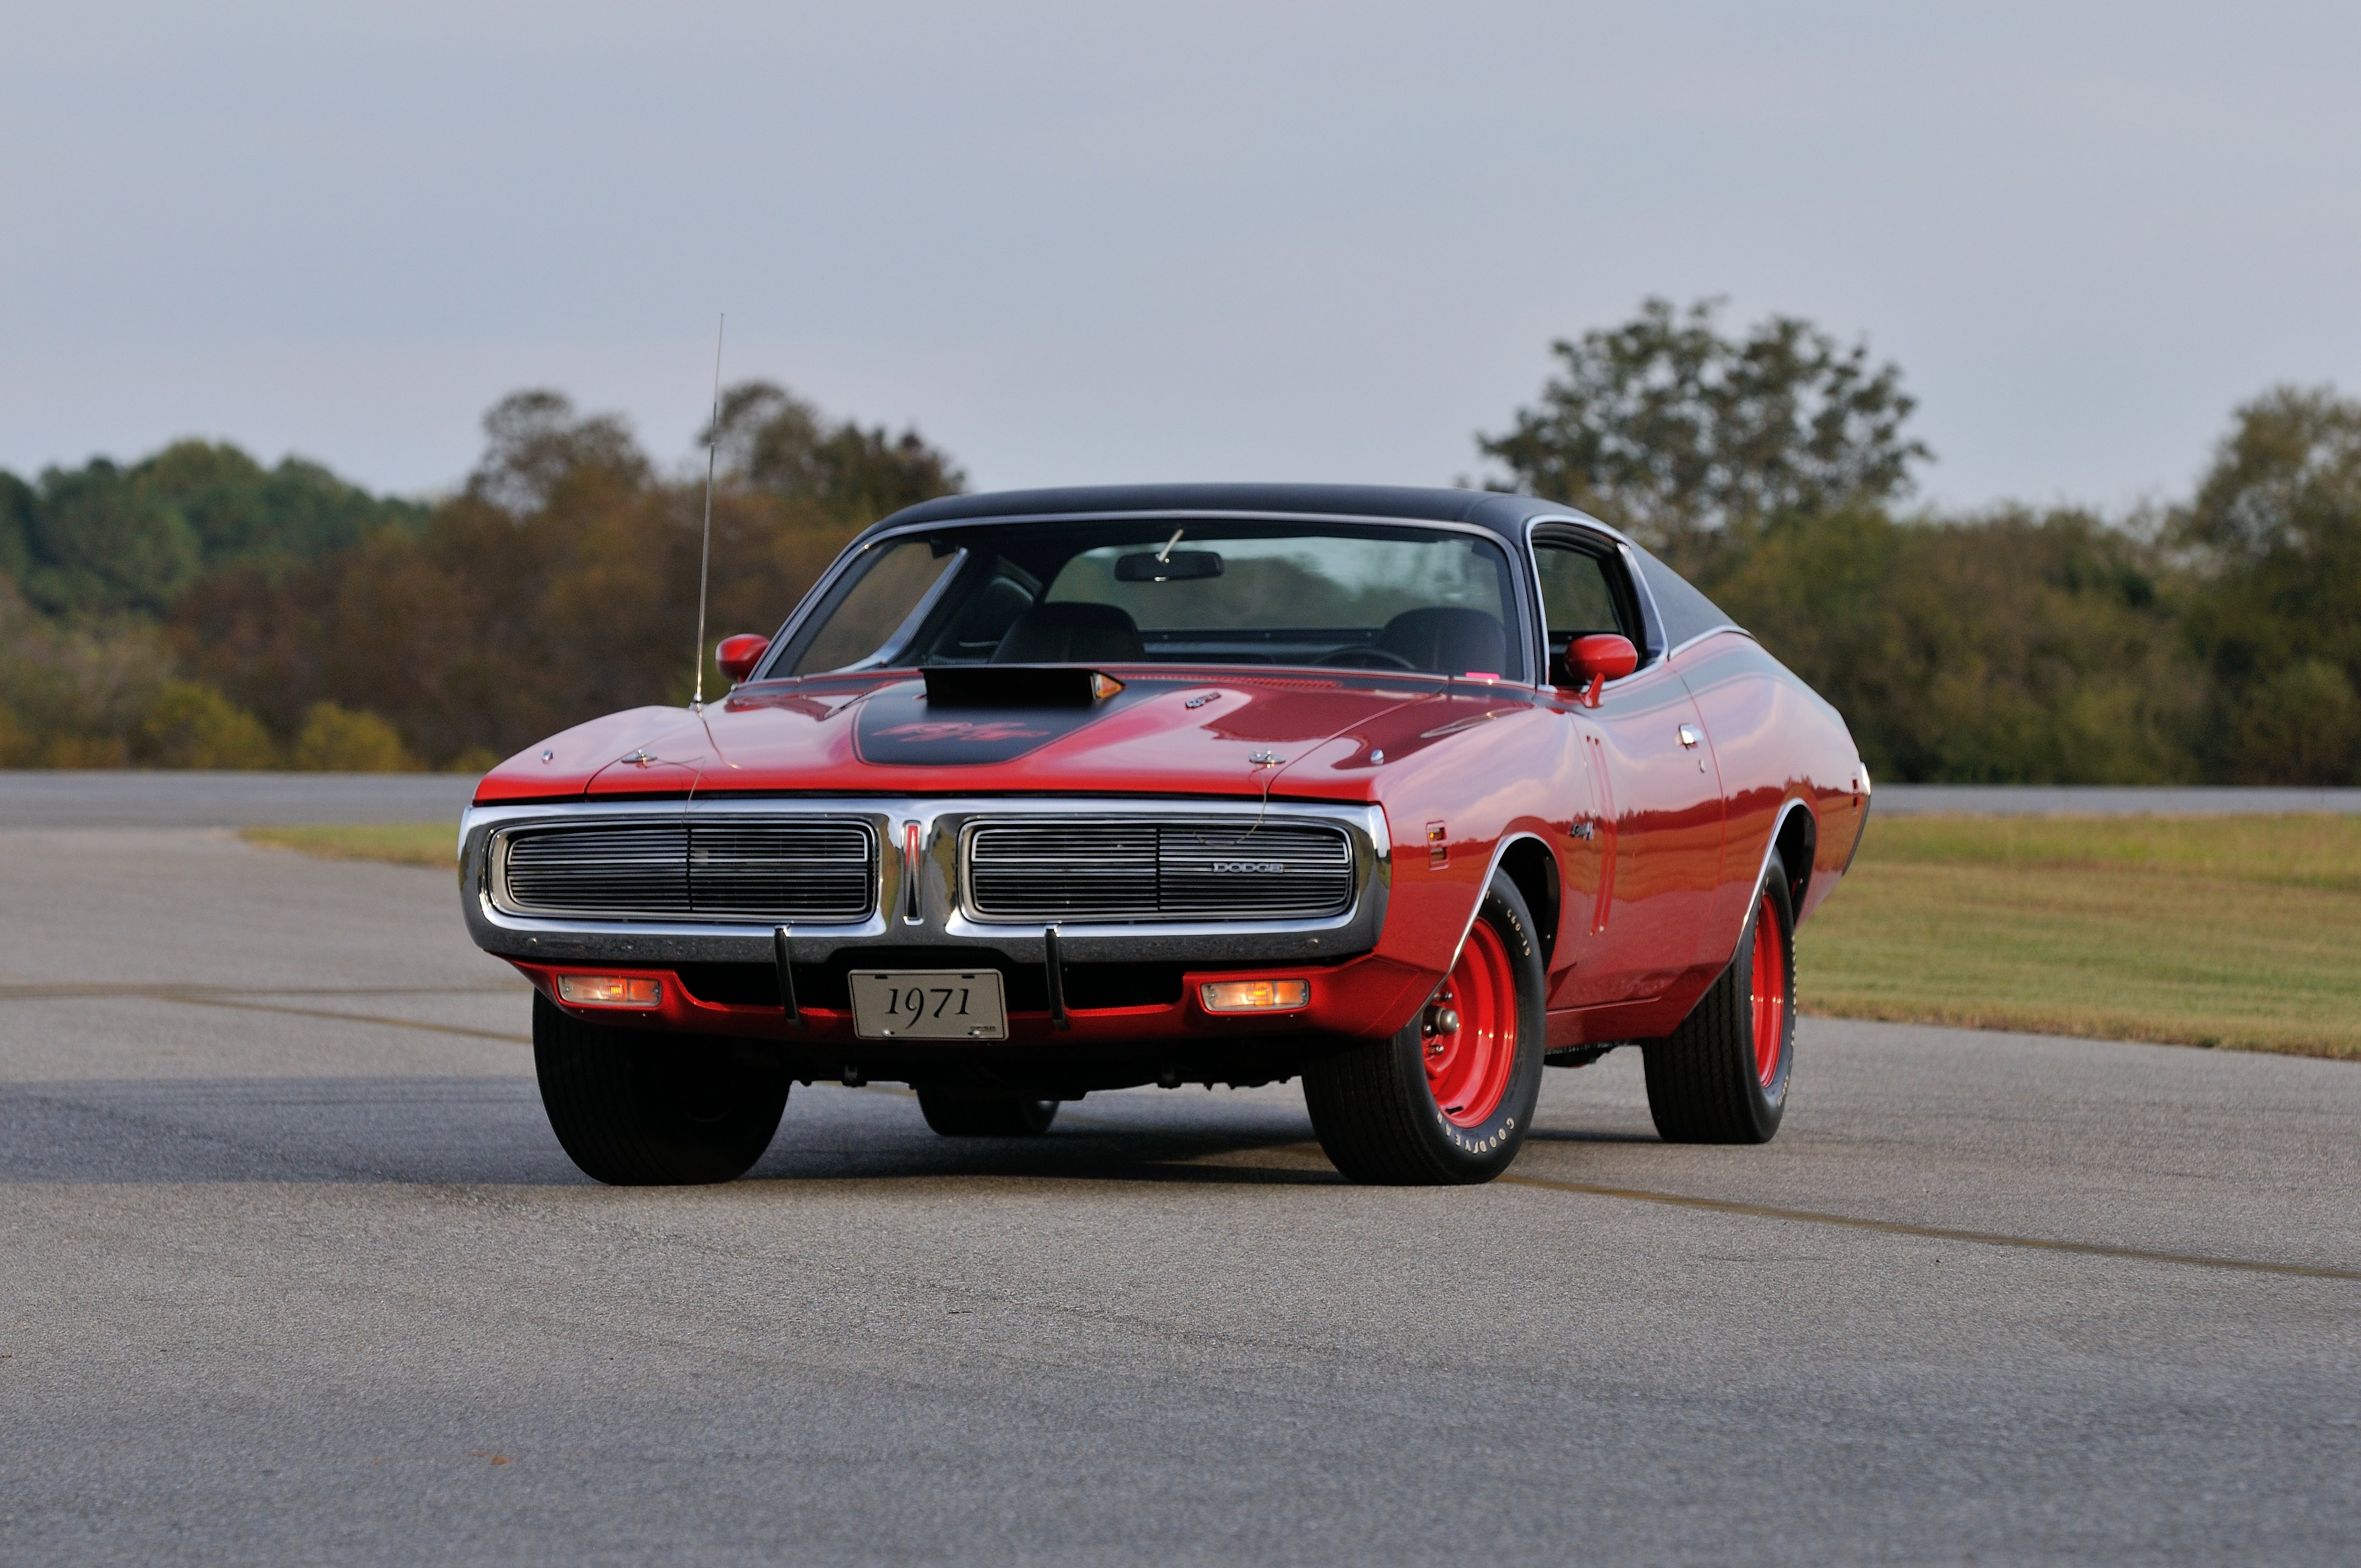 1971, Dodge, Hemi, Charger, Rt, Pilot, Car, Red, Muscle, Classic, Old, Usa, 4288x2848 06 Wallpaper